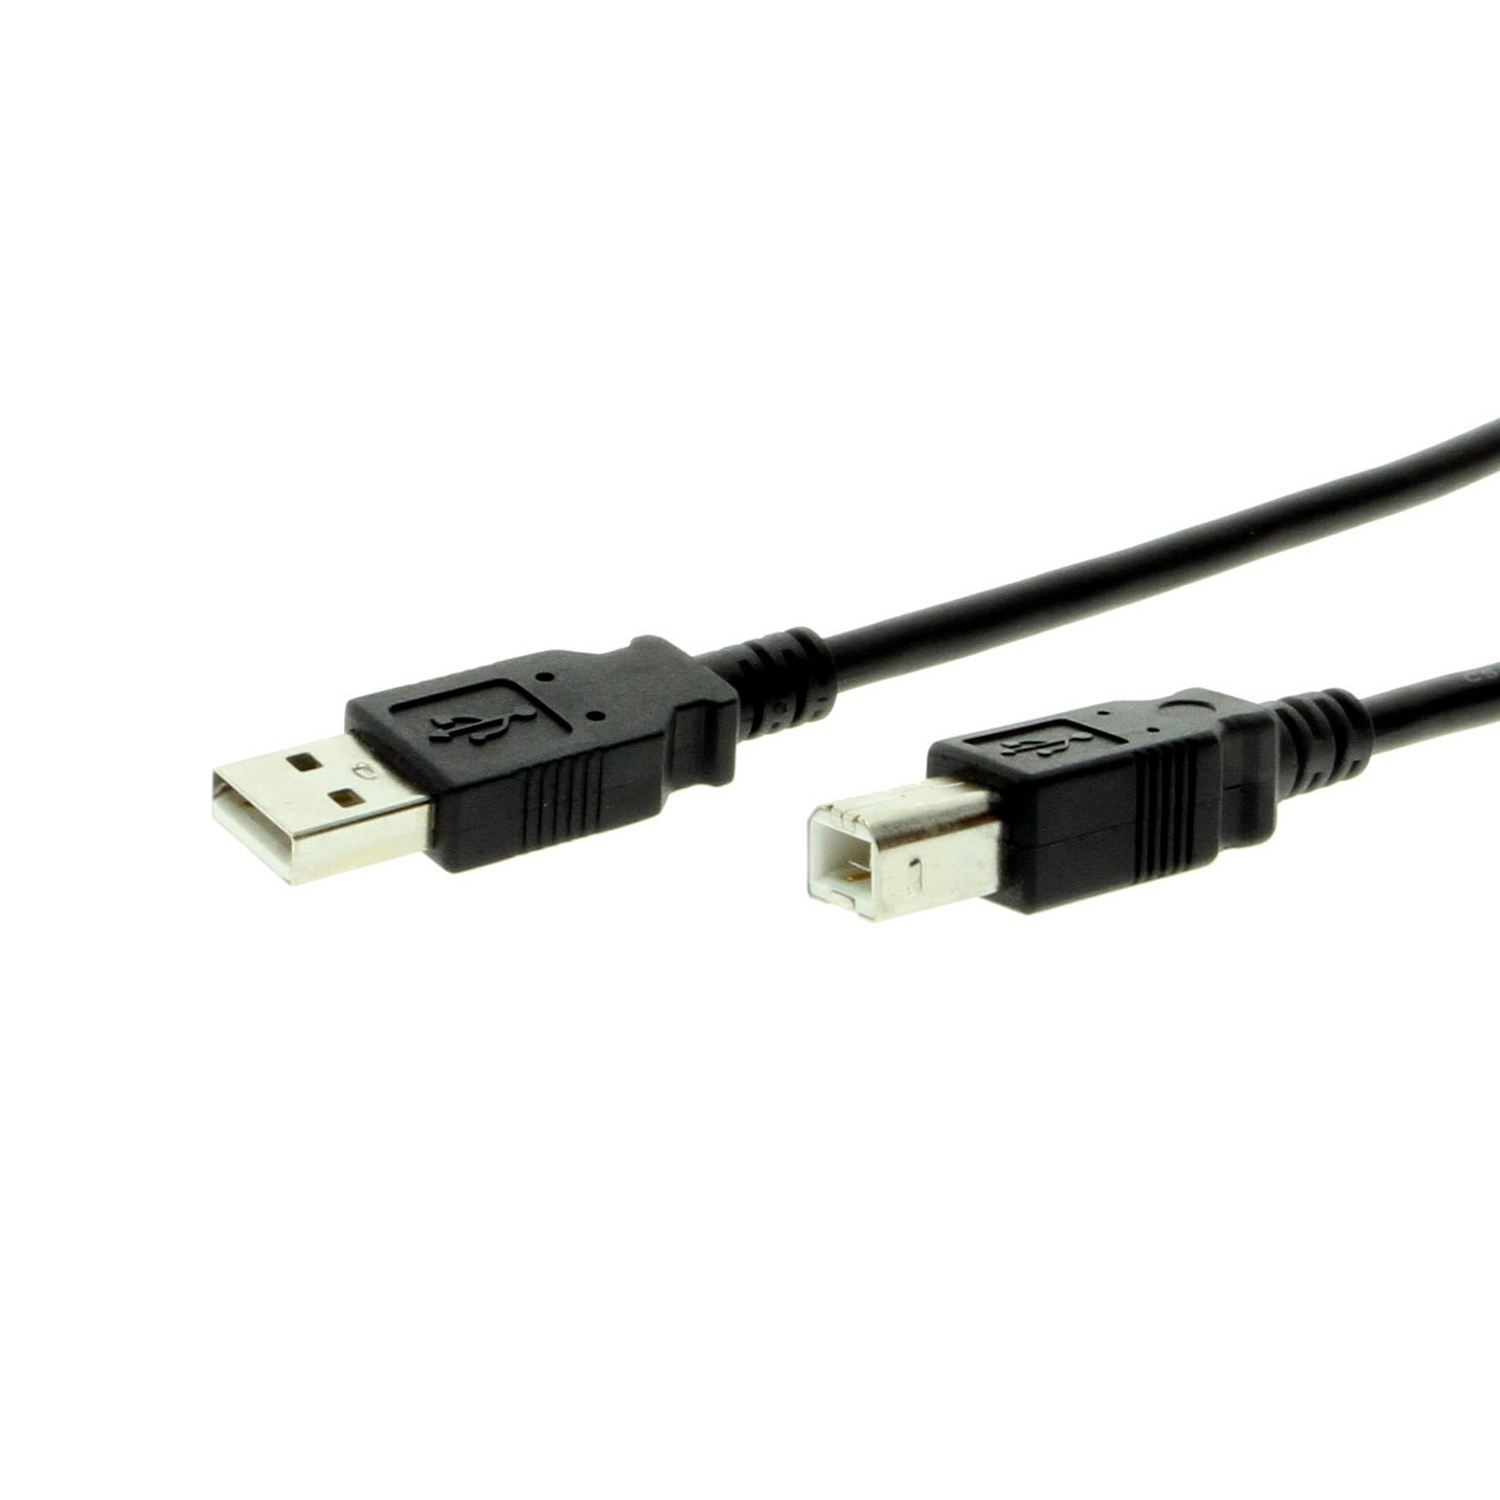 Oceanien forhandler privat Black USB Cable A toB8 inch High-Speed USB 2.0 Device Cable